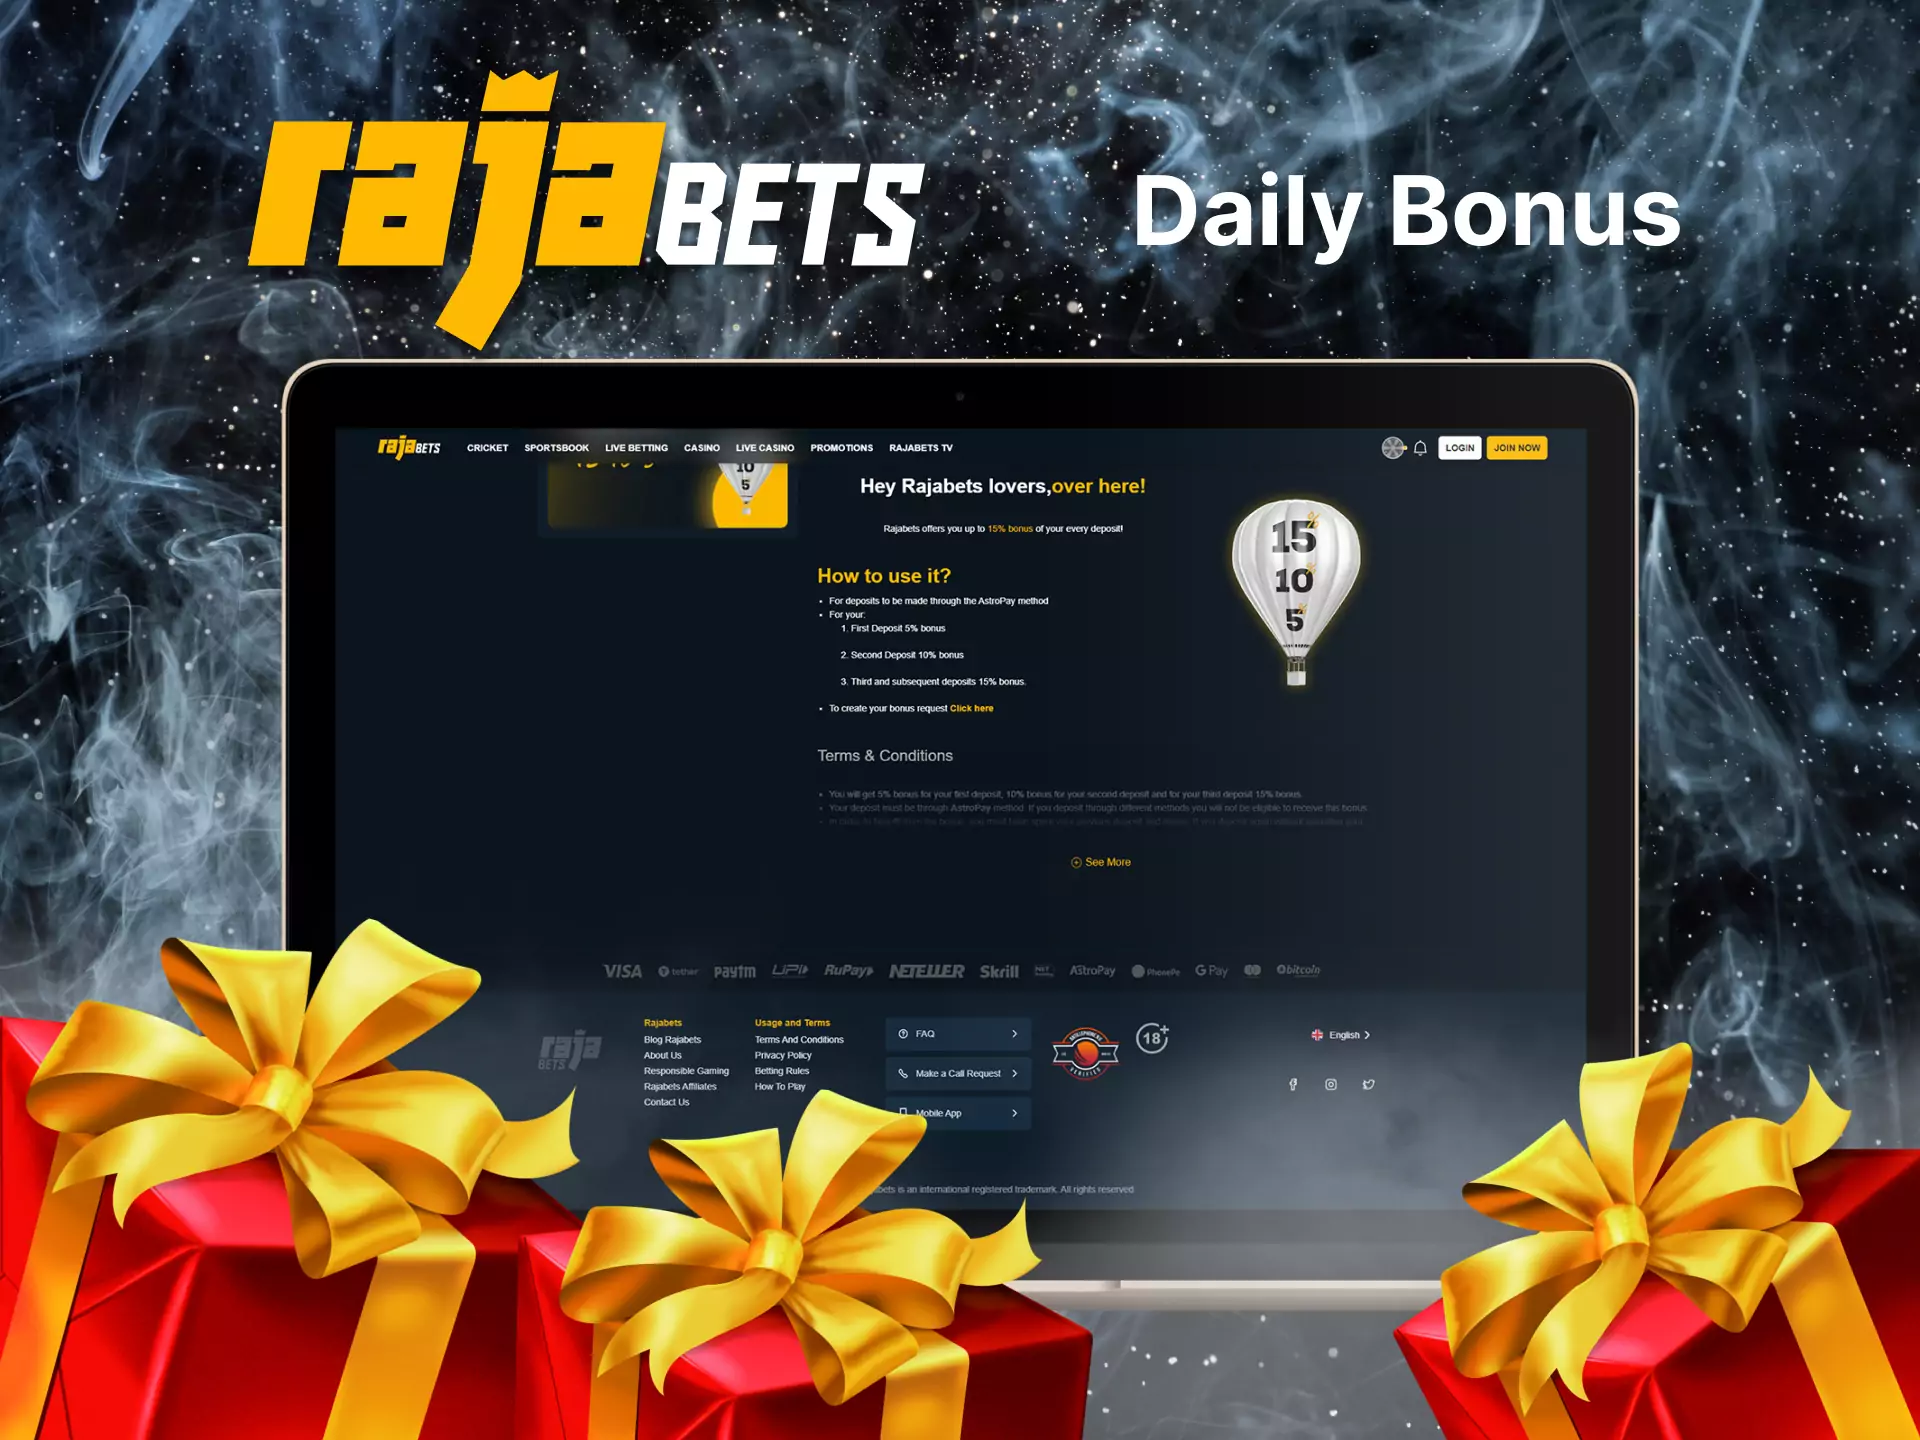 Learn how to use the special daily bonus in Rajabets.